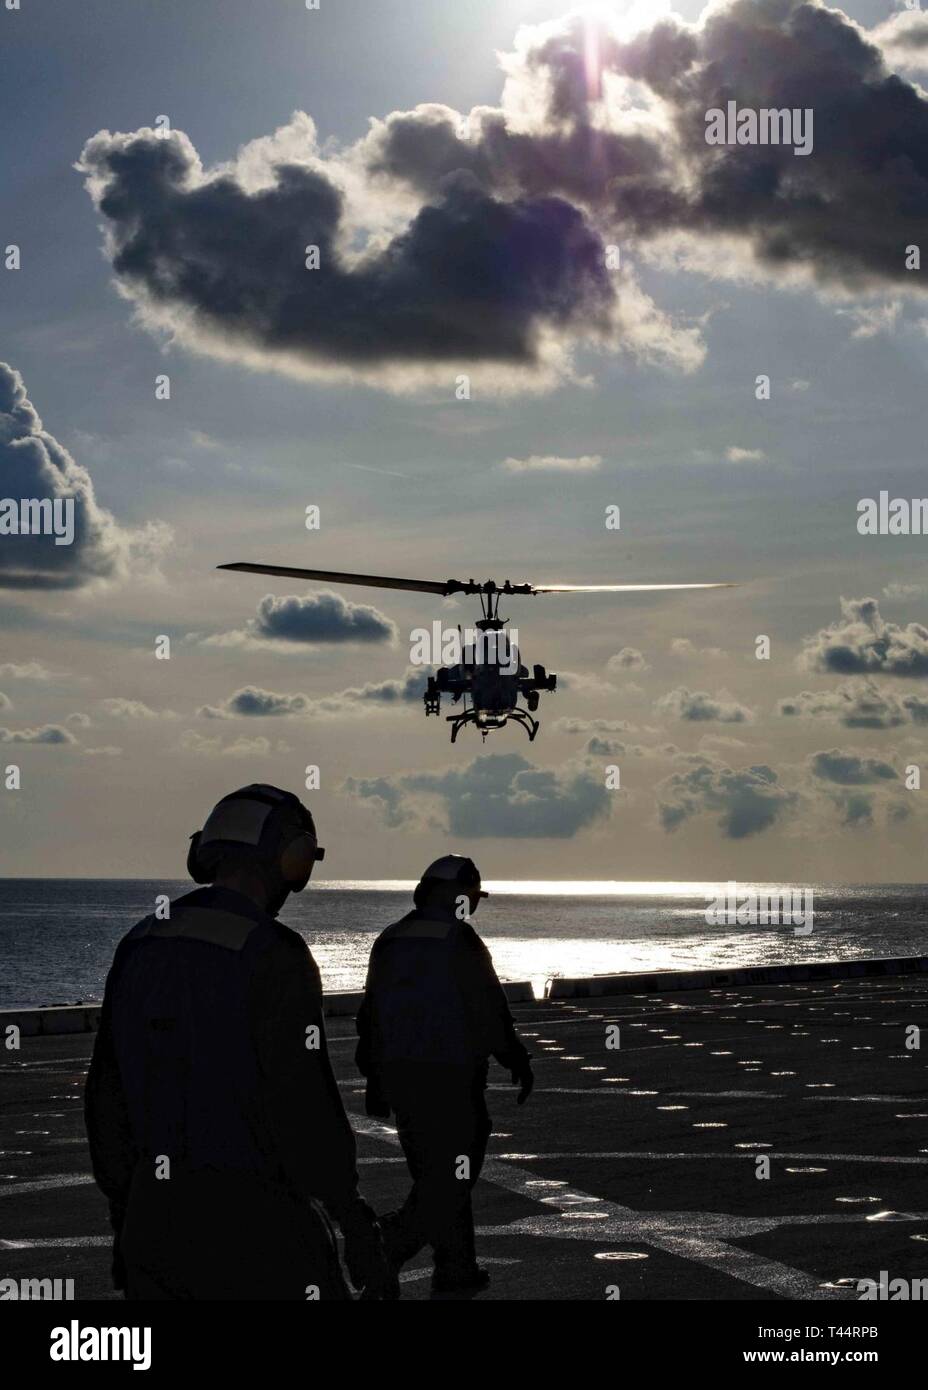 MEDITERRANEAN SEA (Feb. 21, 2019) An AH-1W Super Cobra helicopter assigned to the “Black Knights” of Marine Medium Tiltrotor Squadron (VMM) 264 (Reinforced) prepares to land on the flight deck of the San Antonio-class amphibious transport dock ship USS Arlington (LPD 24), Feb. 21, 2019. Arlington is on a scheduled deployment as part of the Kearsarge Amphibious Ready Group in support of maritime security operations, crisis response and theater security cooperation, while also providing a forward naval presence. Stock Photo